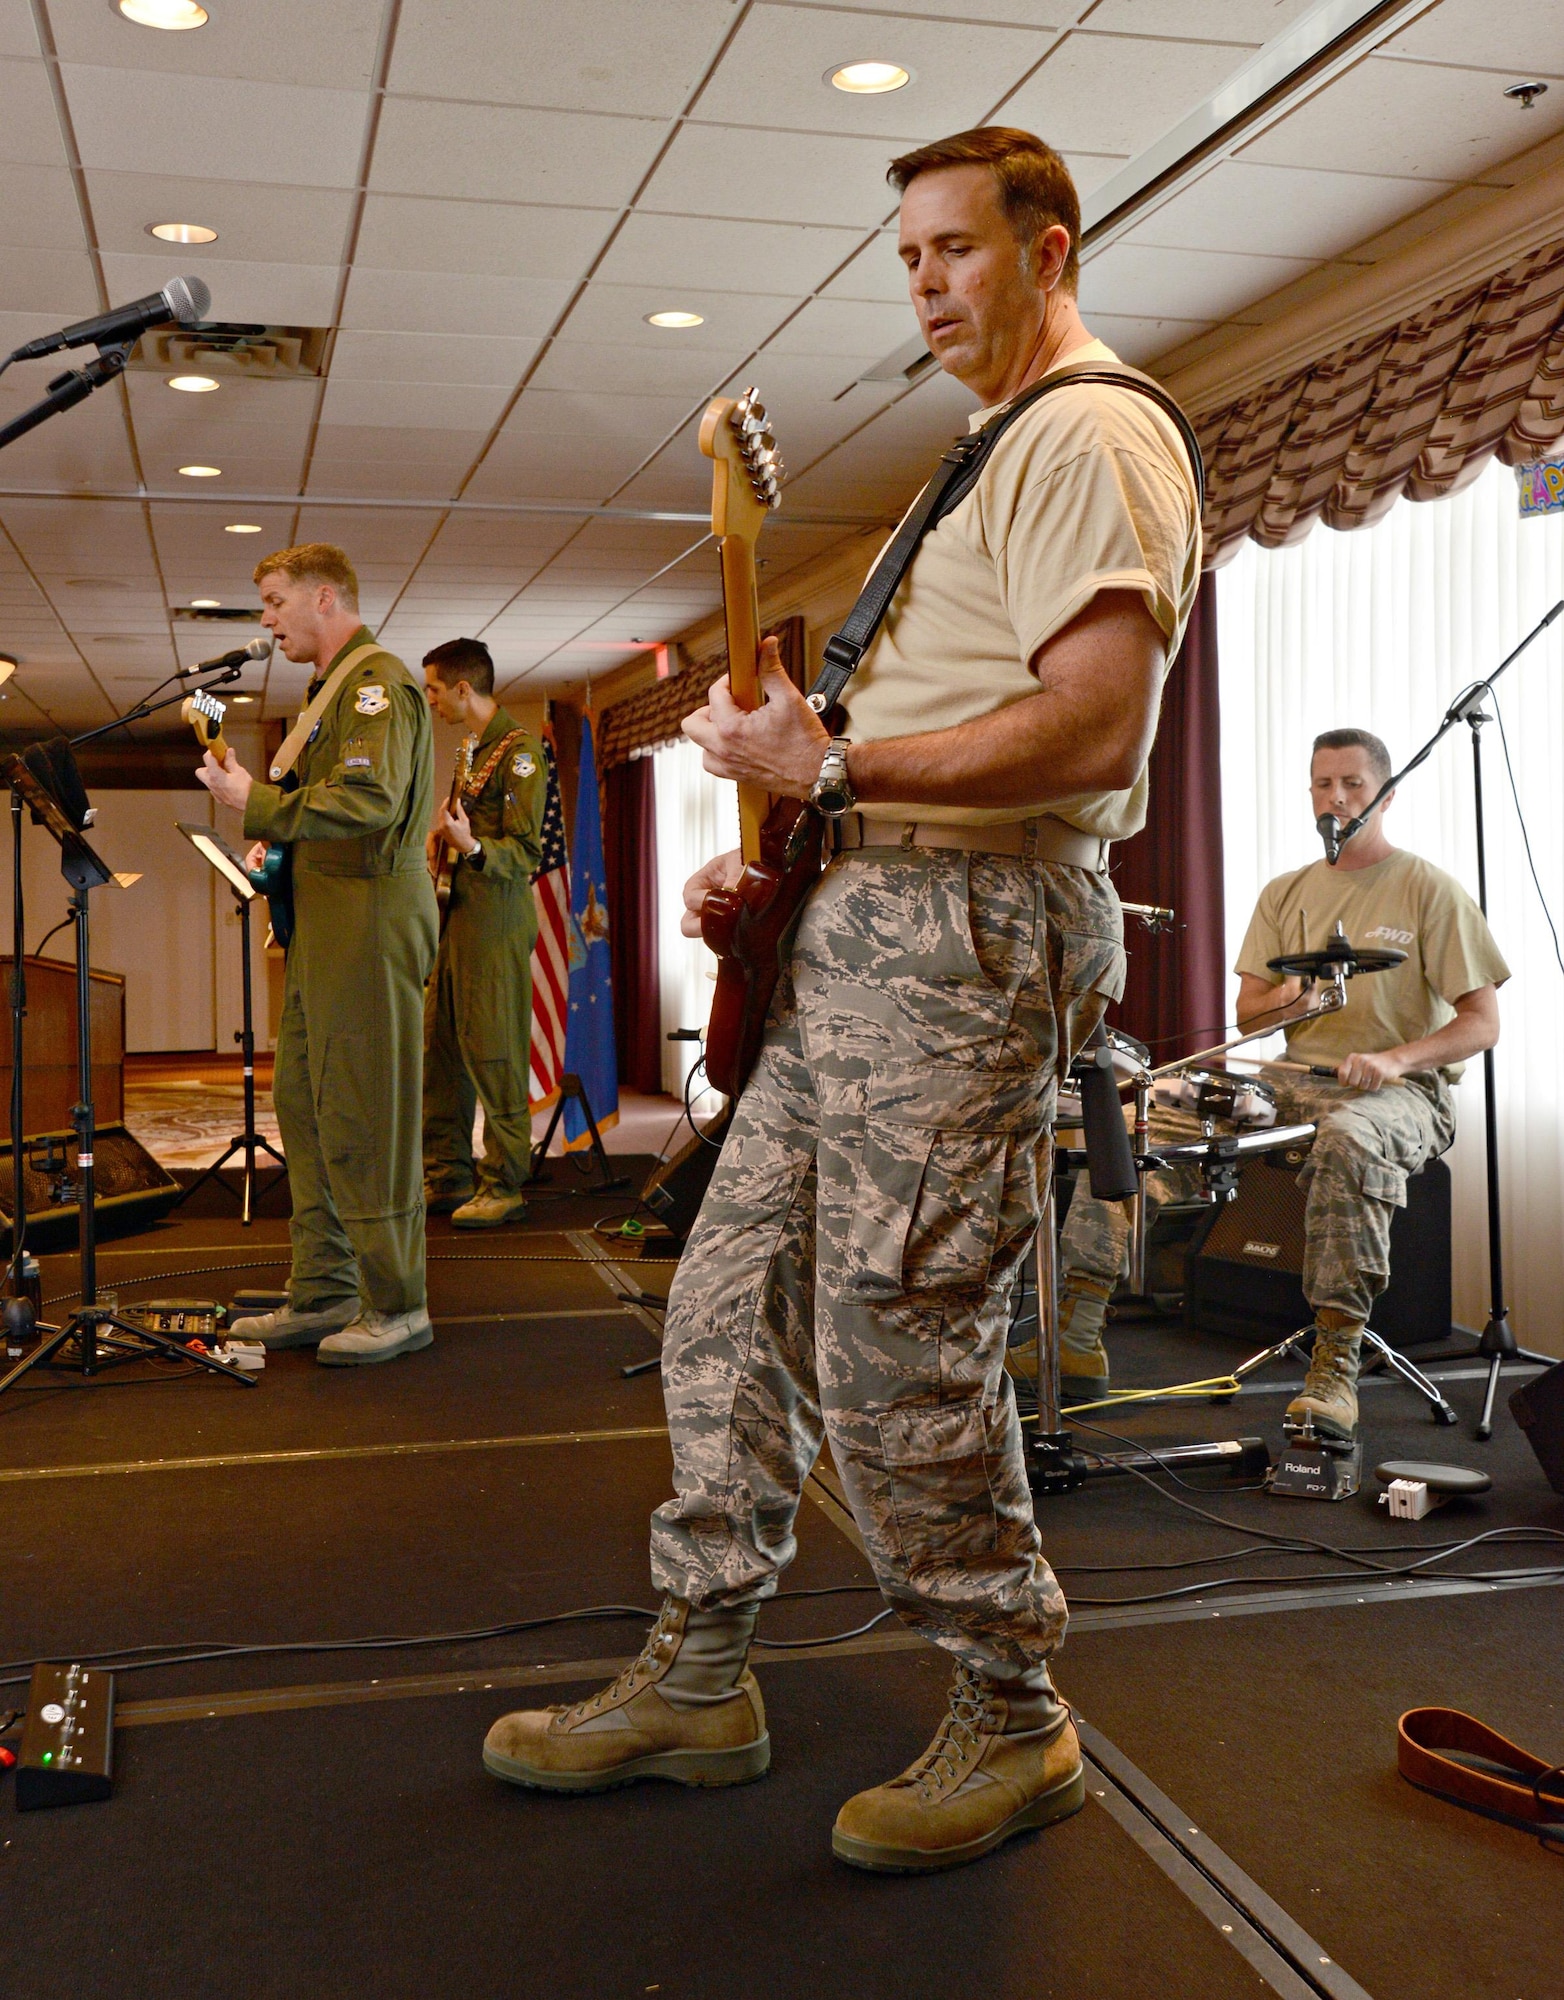 America’s Wing Band, a band comprised of active duty officers from the 552nd Air Control Wing, entertained the crowd at the Tinker Club Sept. 15 to help celebrate the Air Force’s 69th birthday. (Air Force photo by Kelly White)